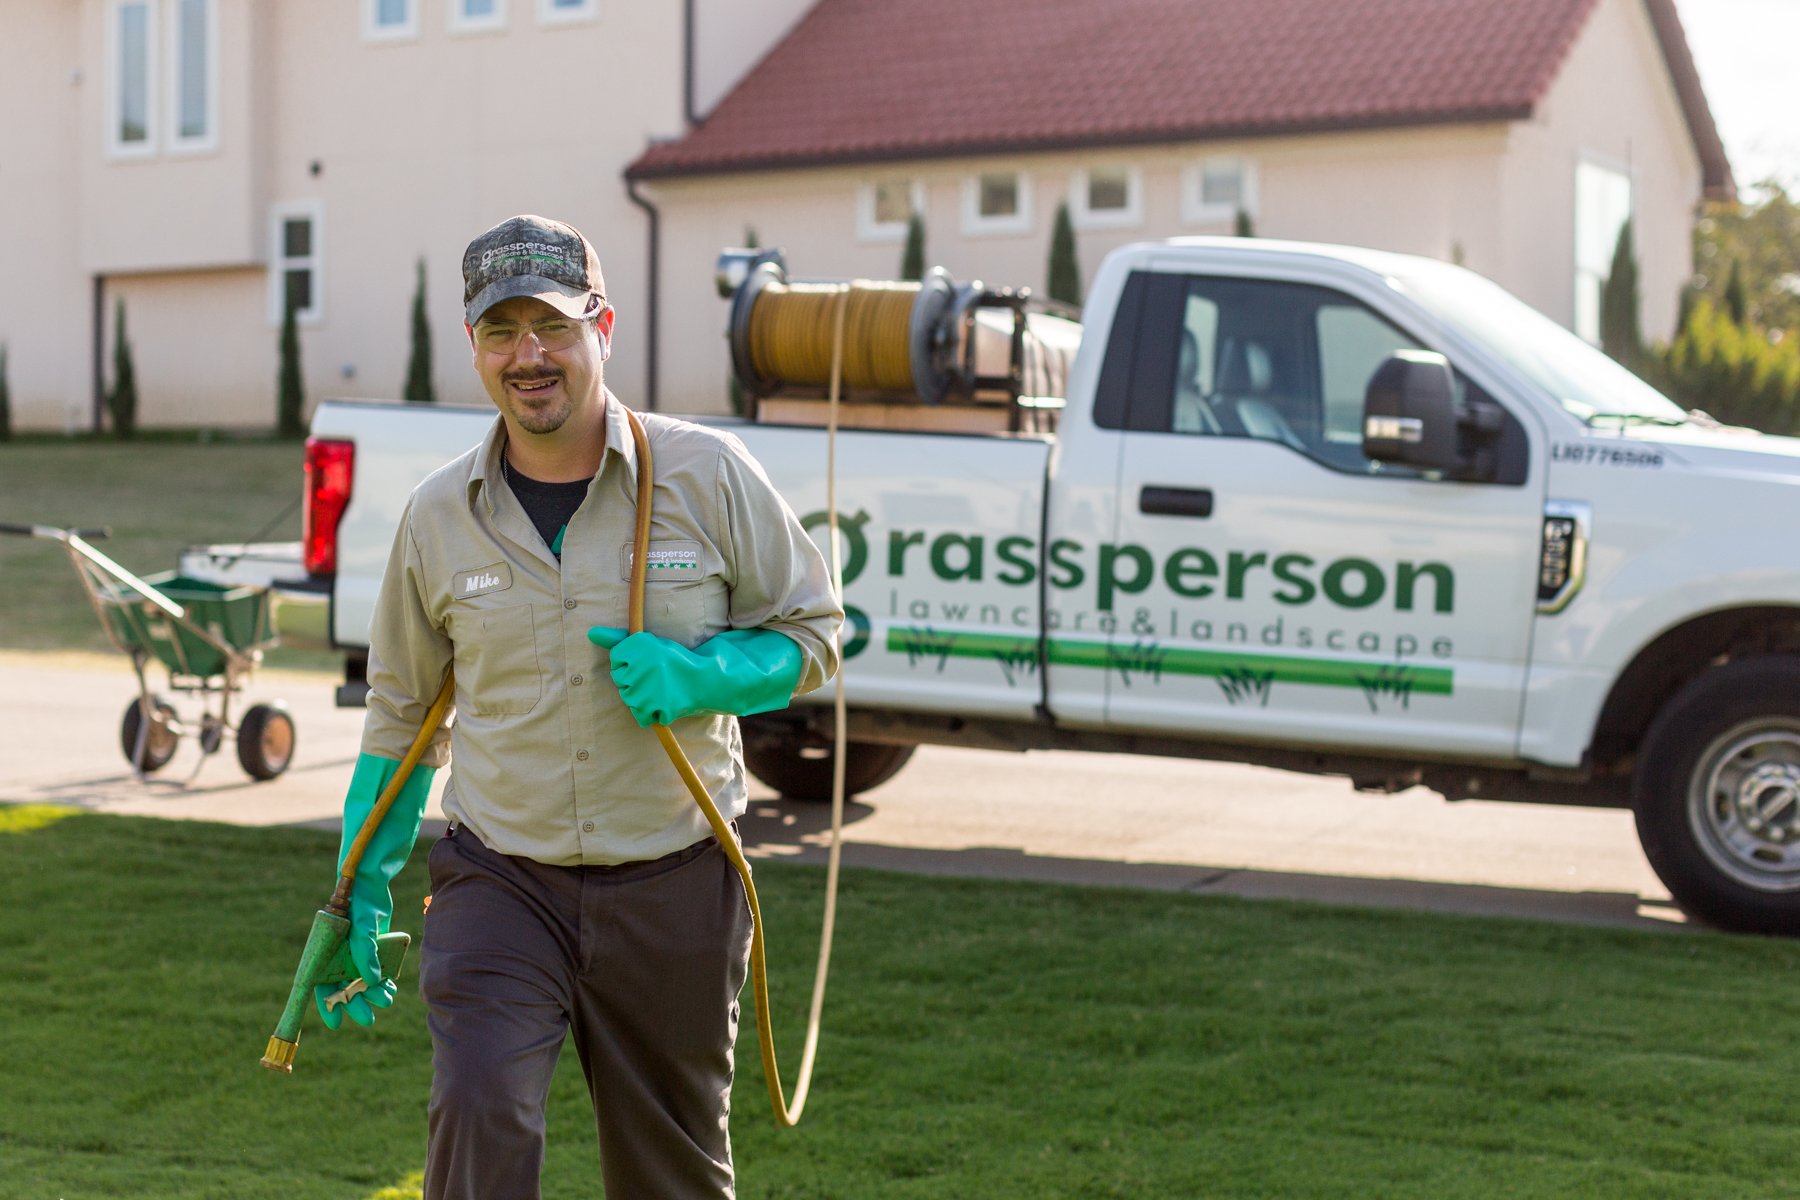 lawn care technician pulls hose from truck 